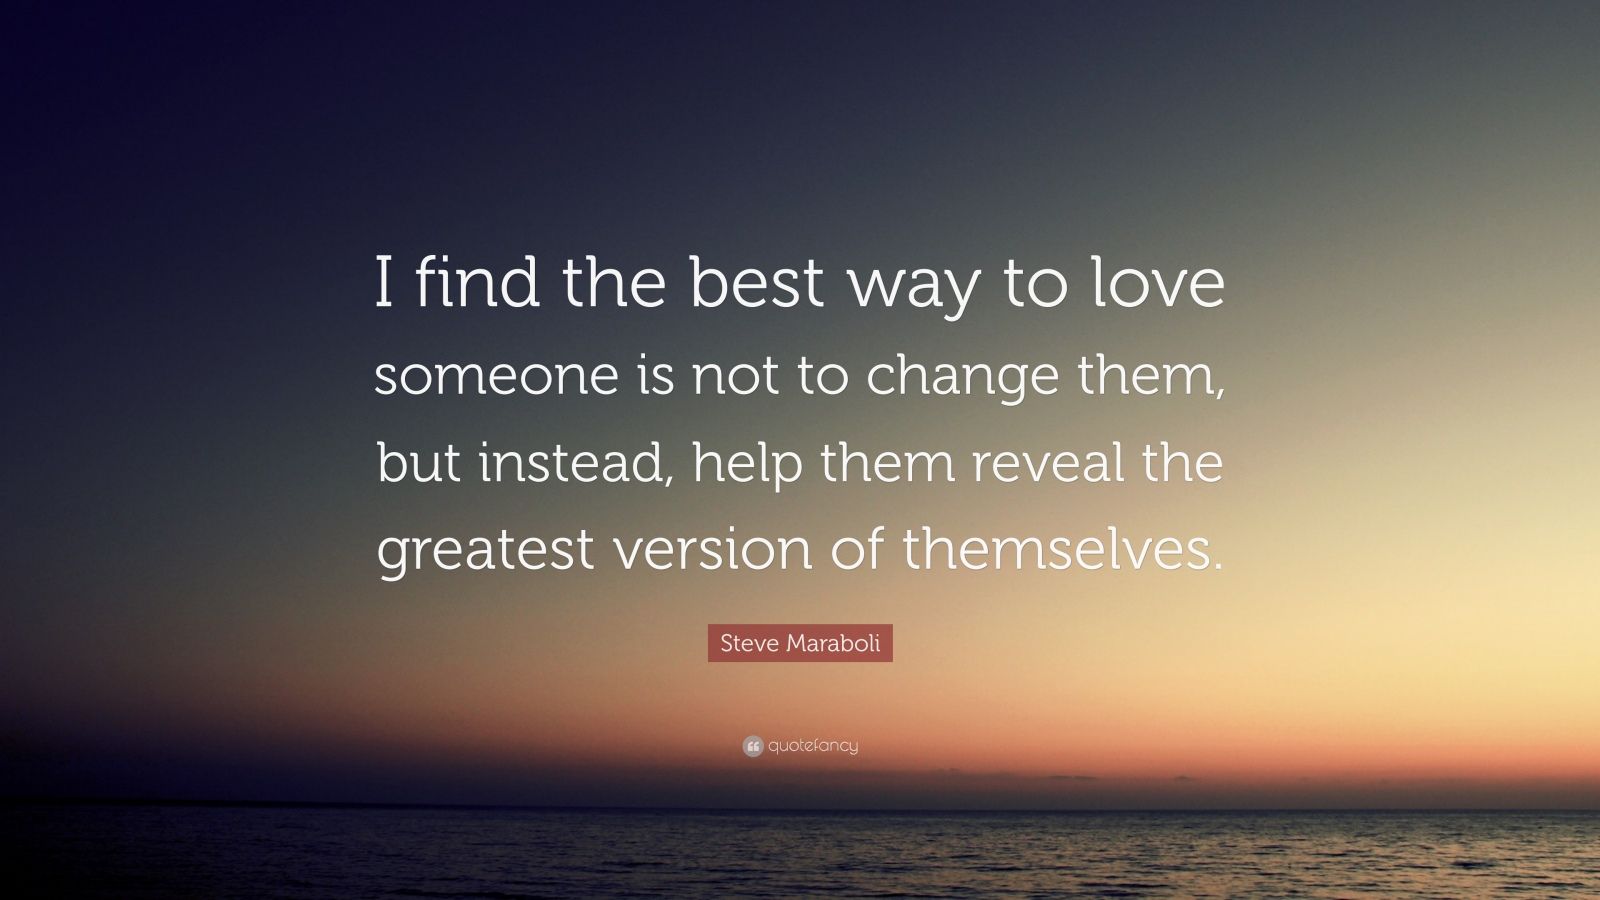 Steve Maraboli Quote: “I find the best way to love someone is not to ...